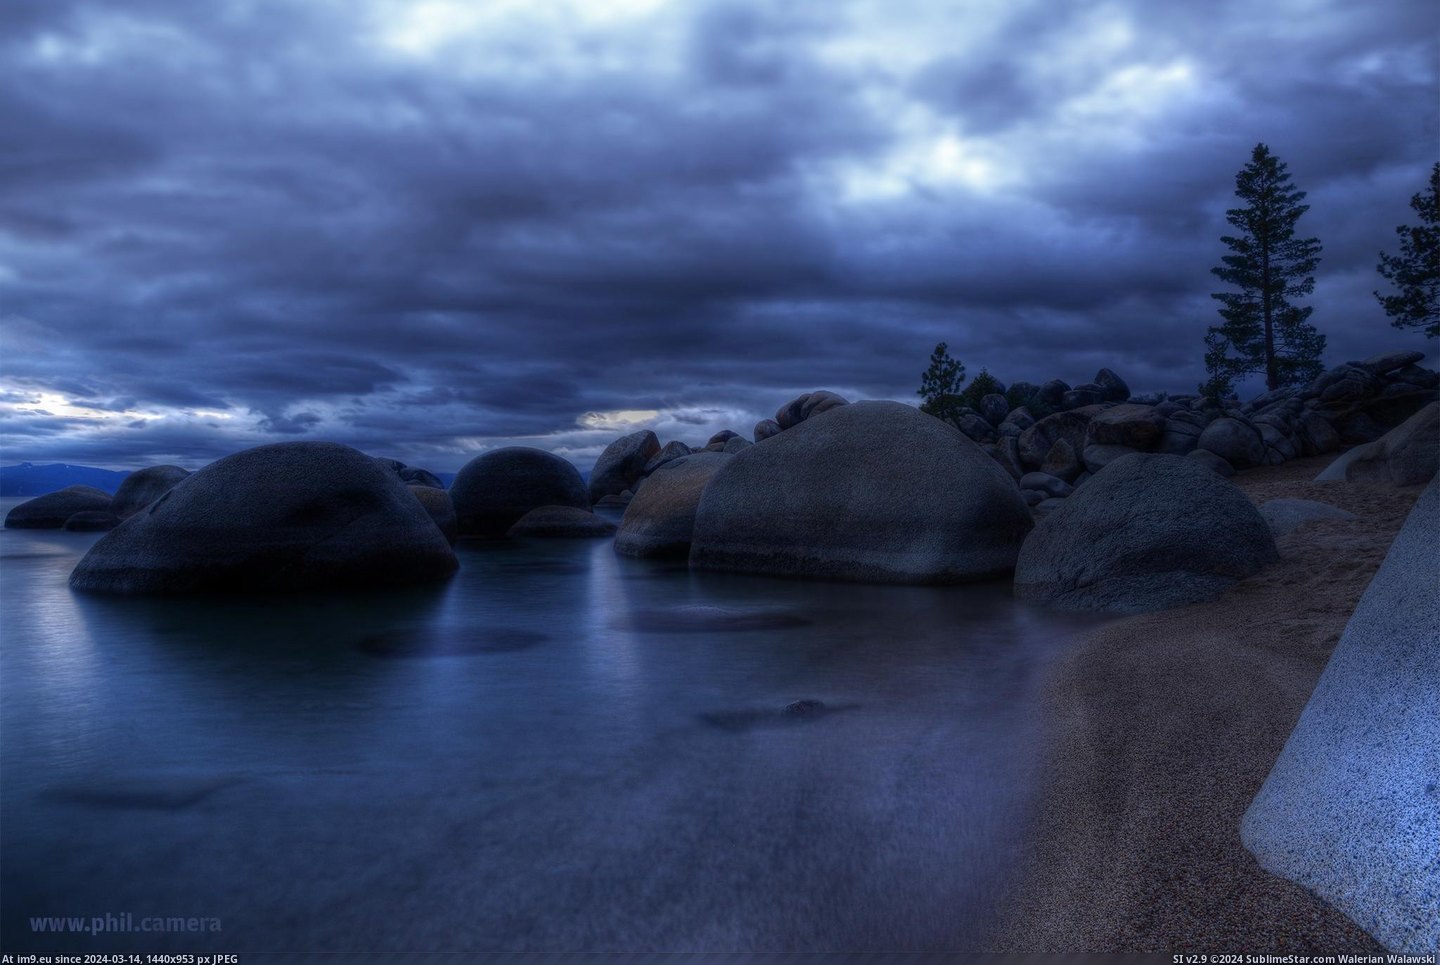 #Lake #Water #East #Skies #2048x1367 #Tahoe #Surreal #Shore [Earthporn] Stilled Water and Surreal Skies over east shore, Lake Tahoe, last weeked [oc][2048x1367] Pic. (Изображение из альбом My r/EARTHPORN favs))